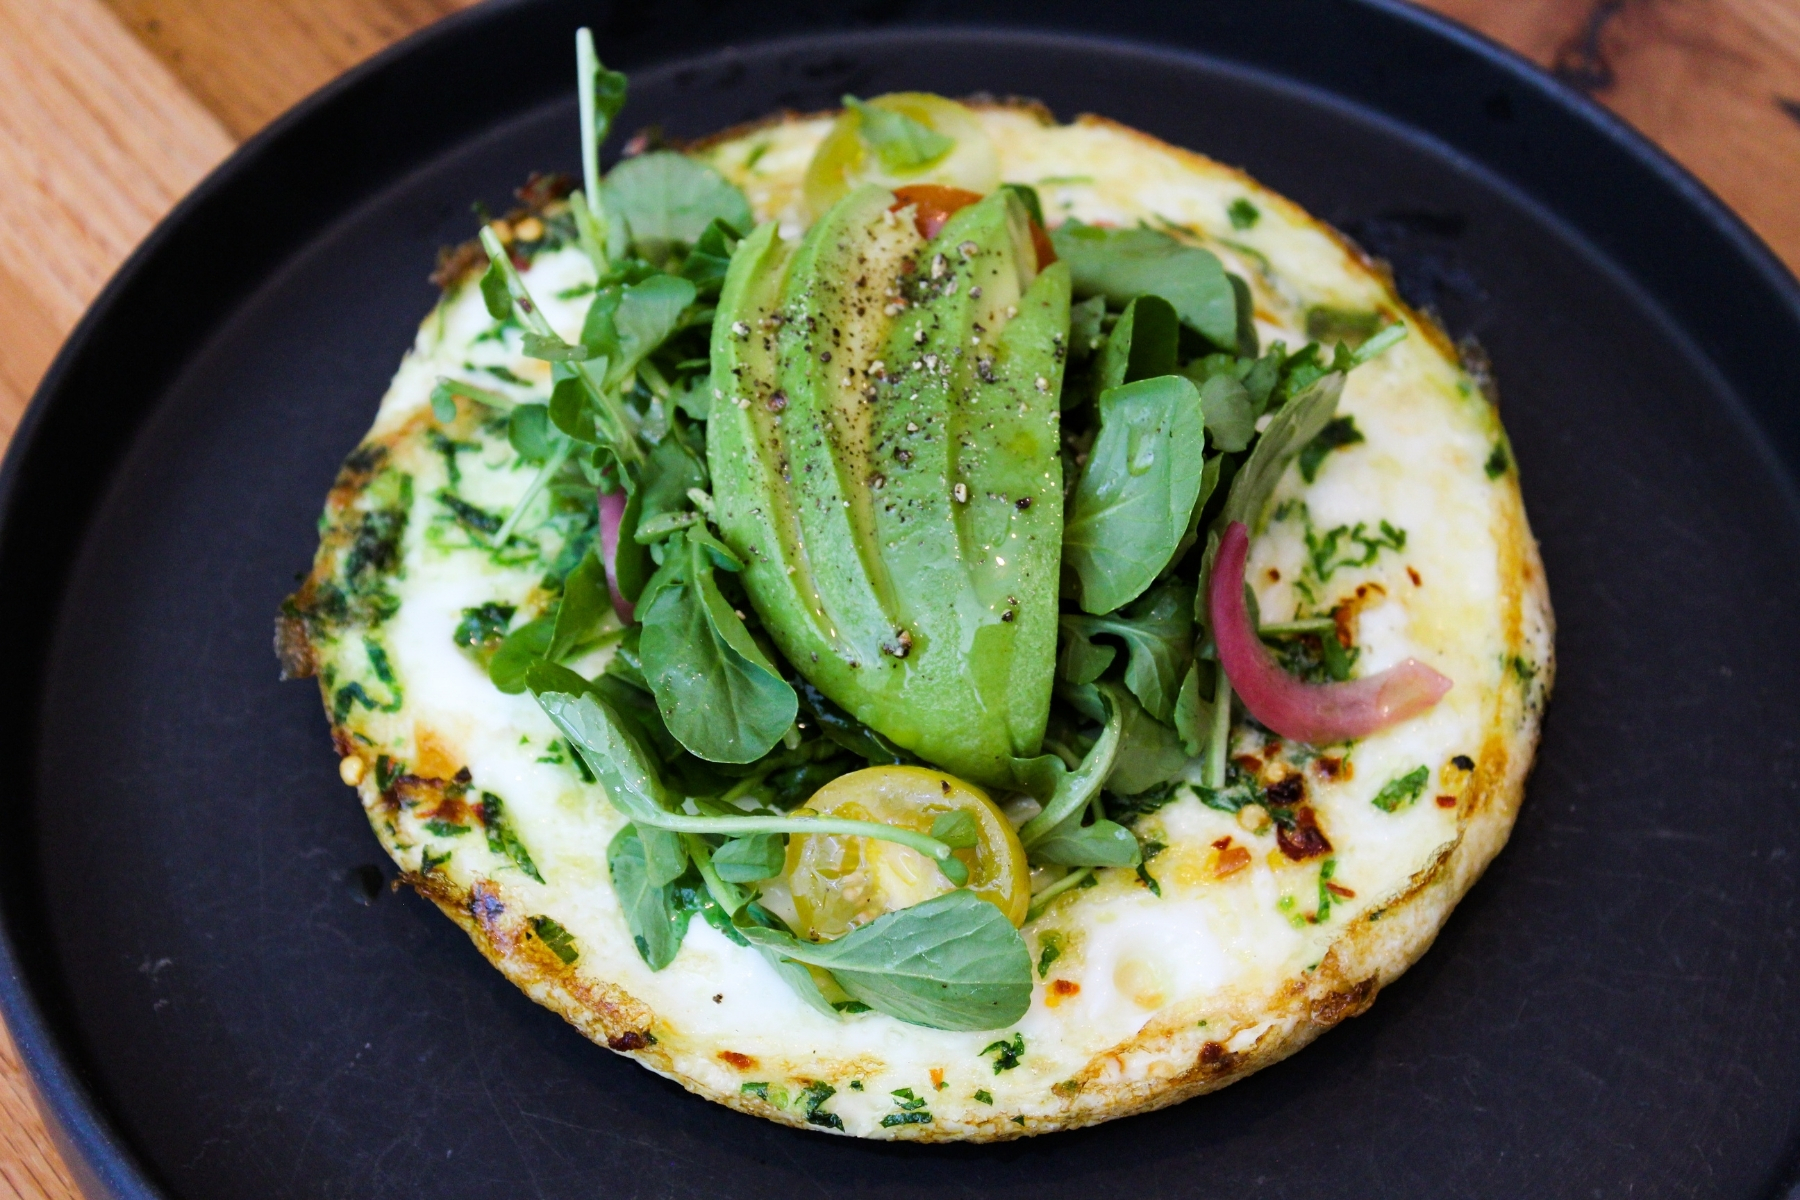 A round egg white frittata topped with greens and avocado slices.